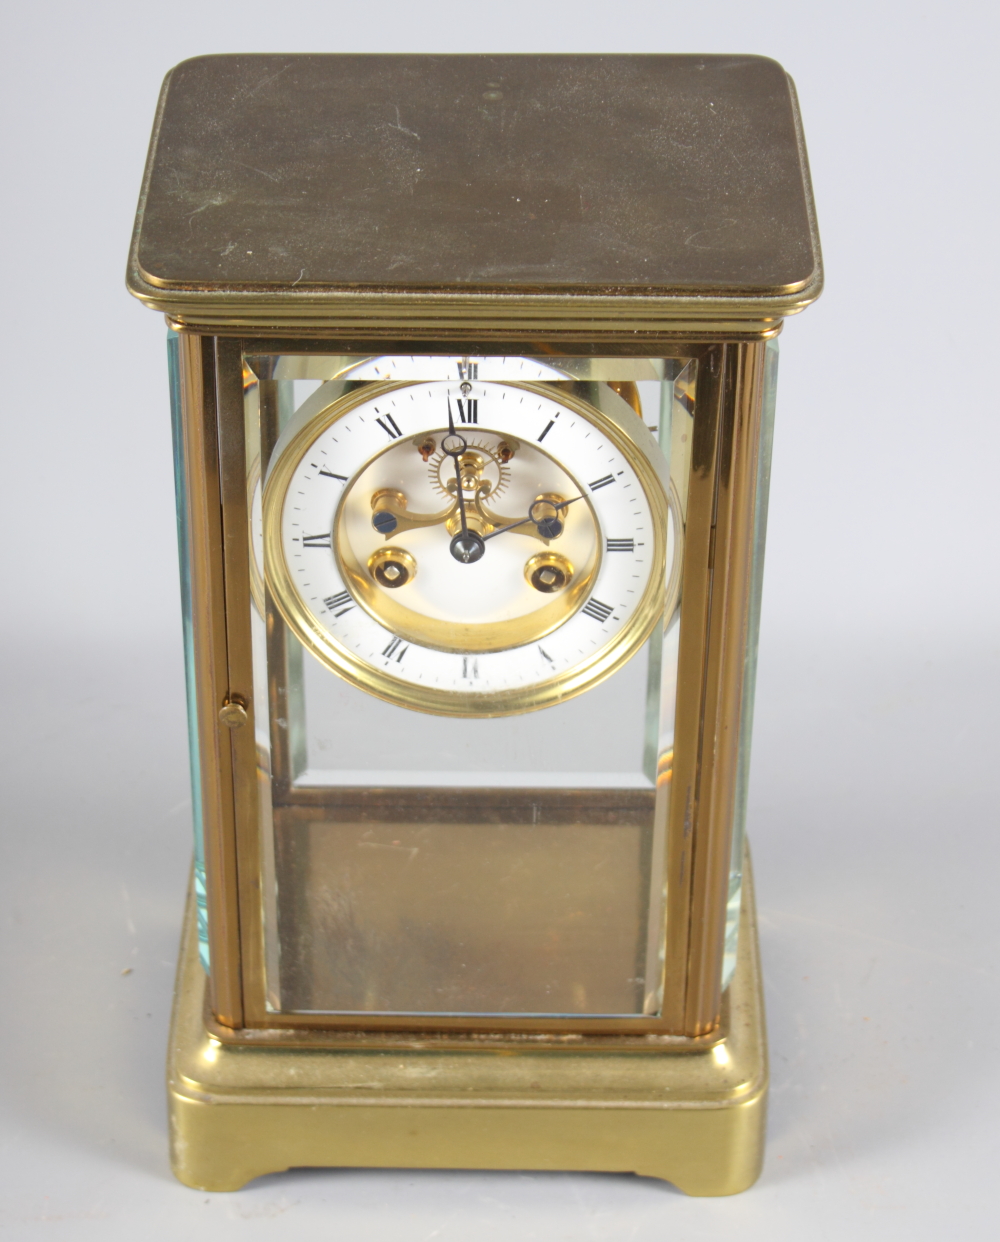 A 19th Century brass cased four-glass clock with white enamel dial and striking movement, 10 1/2"